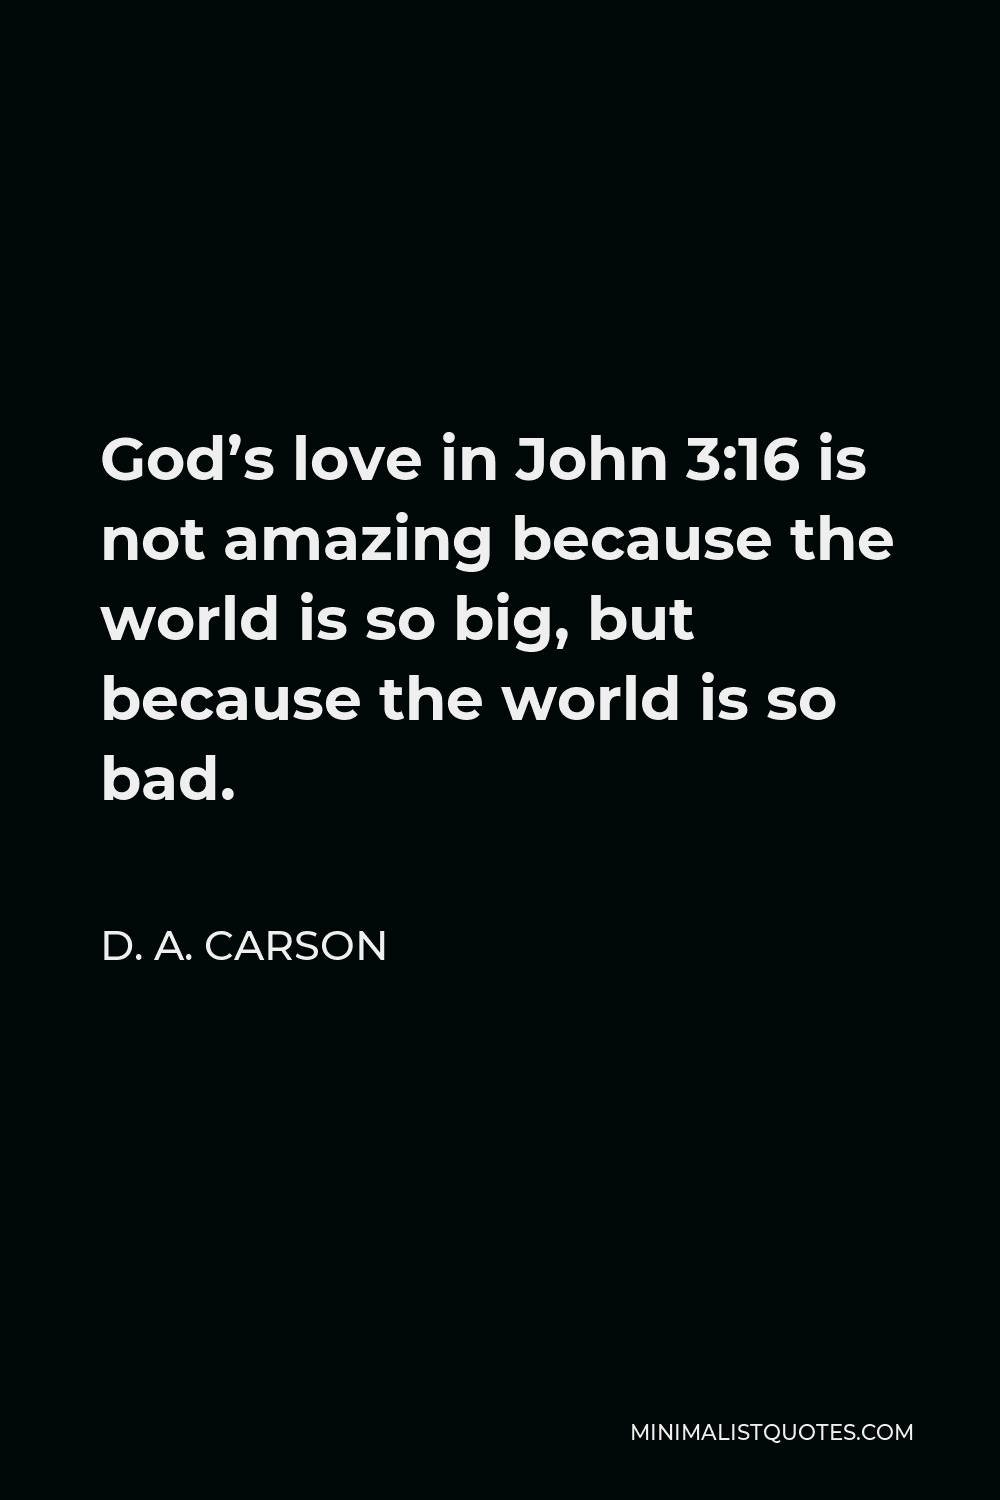 D. A. Carson Quote - God’s love in John 3:16 is not amazing because the world is so big, but because the world is so bad.